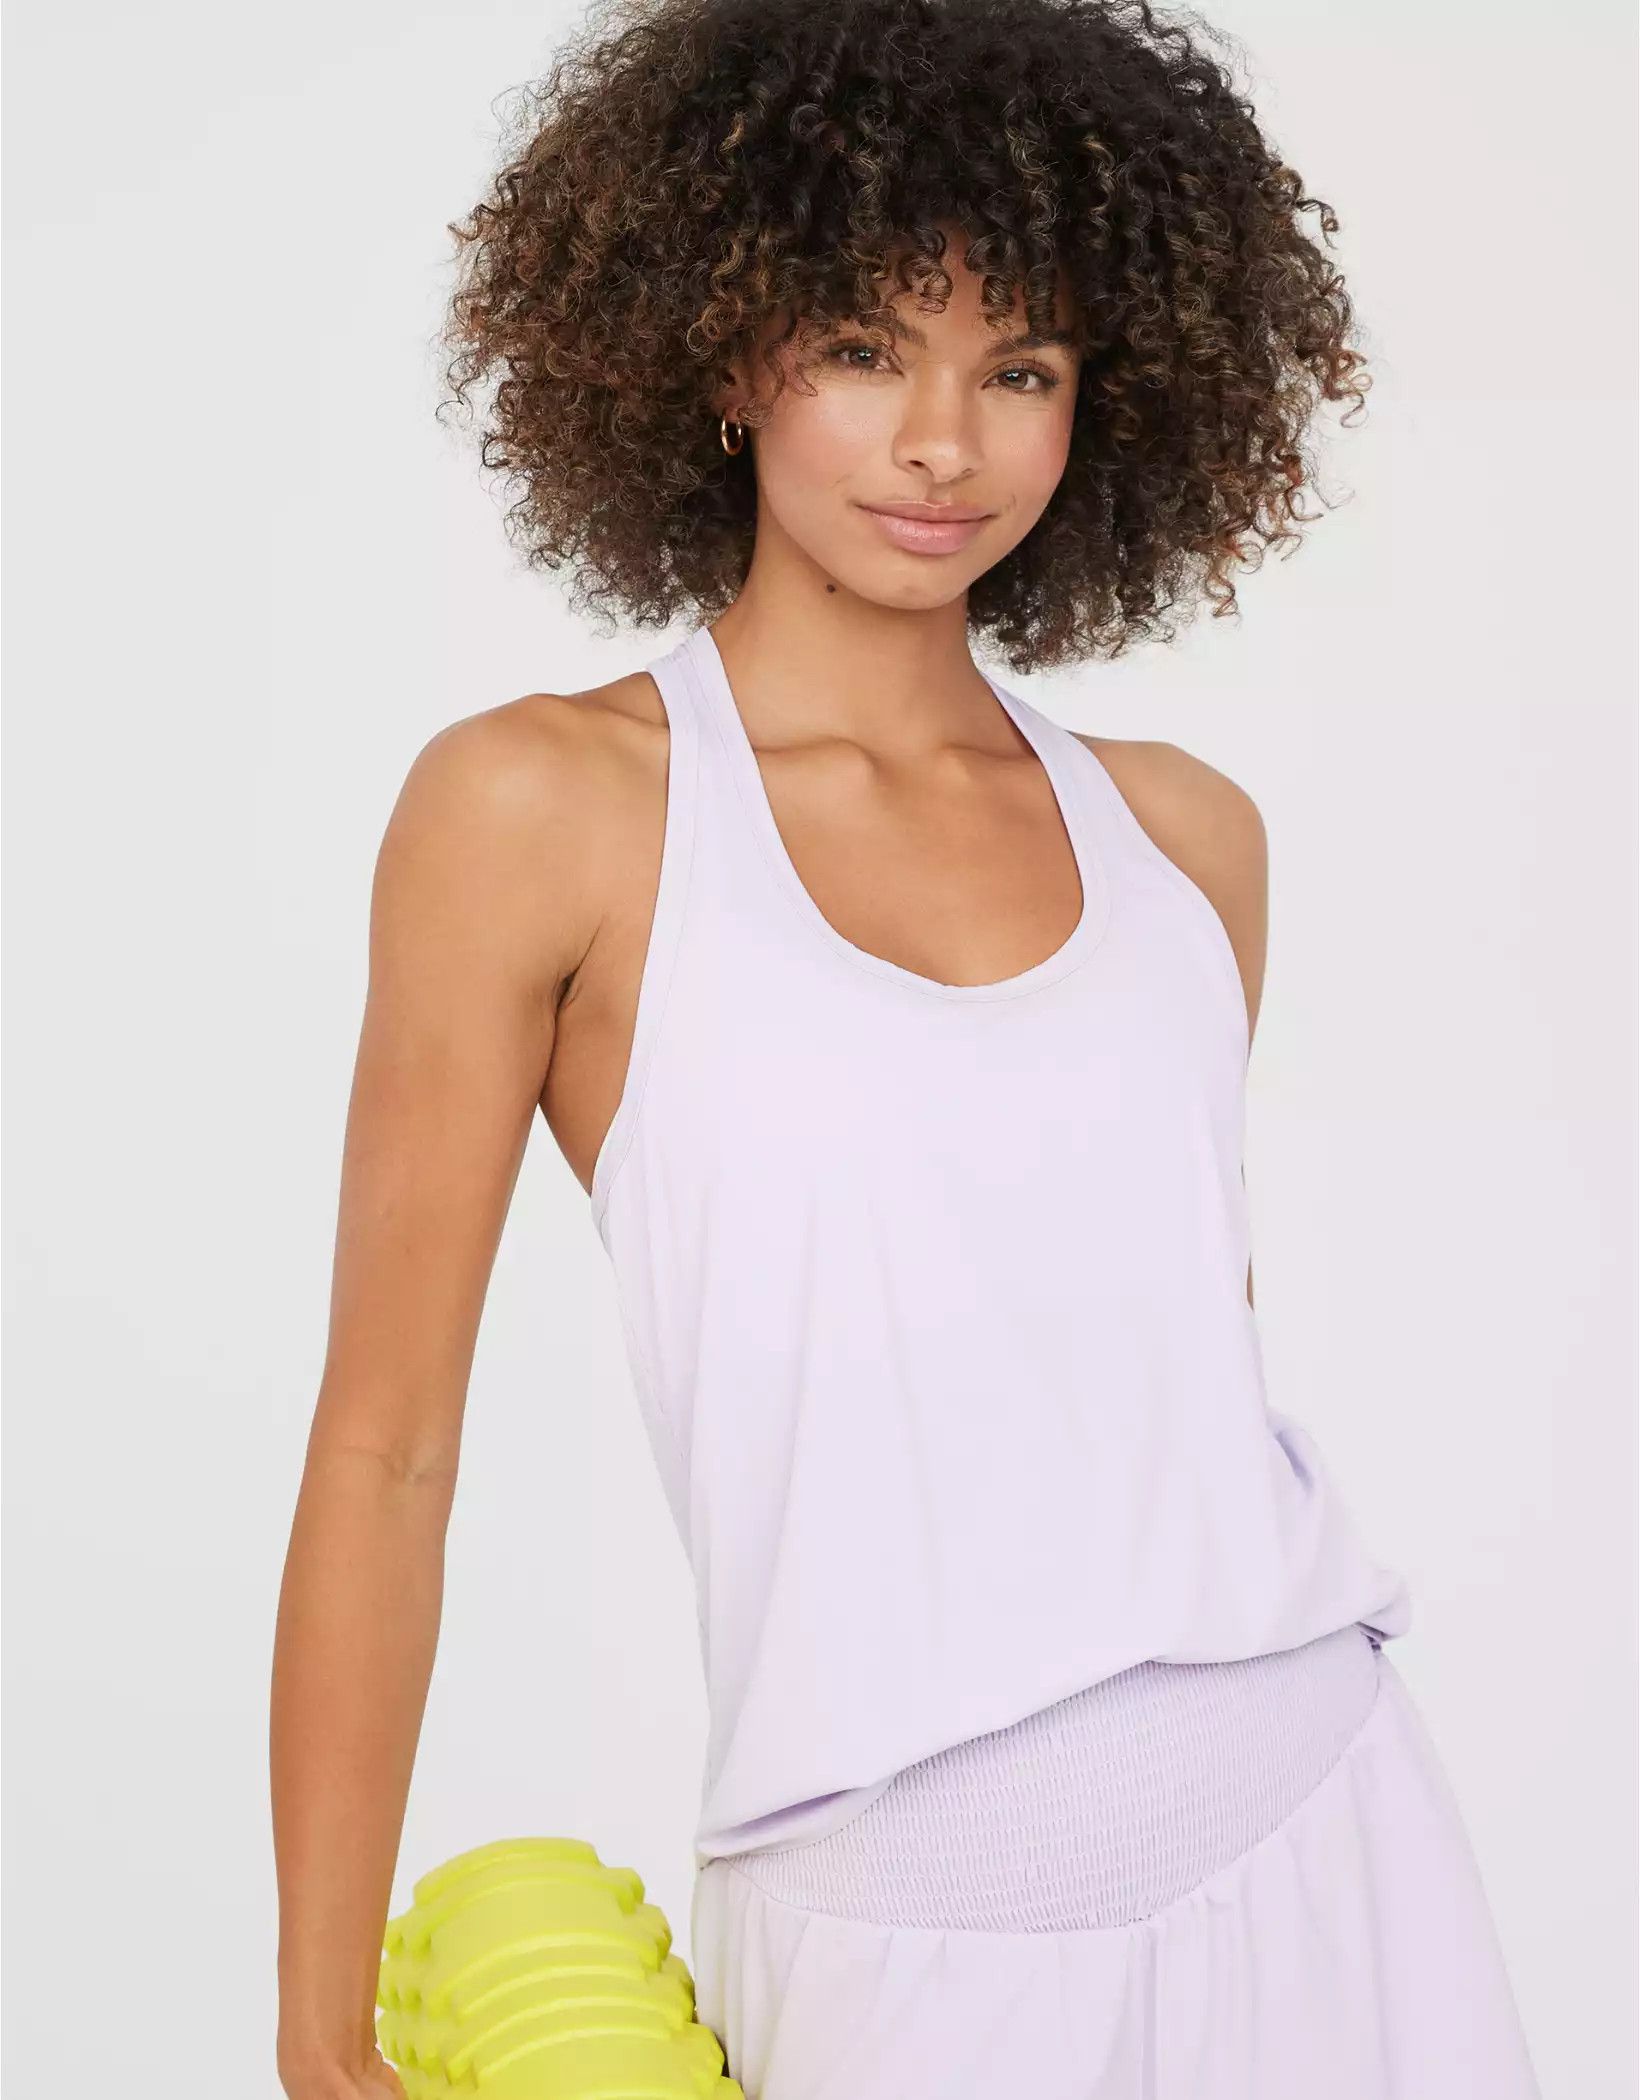 OFFLINE By Aerie Move-It Rib Tank Top | Aerie